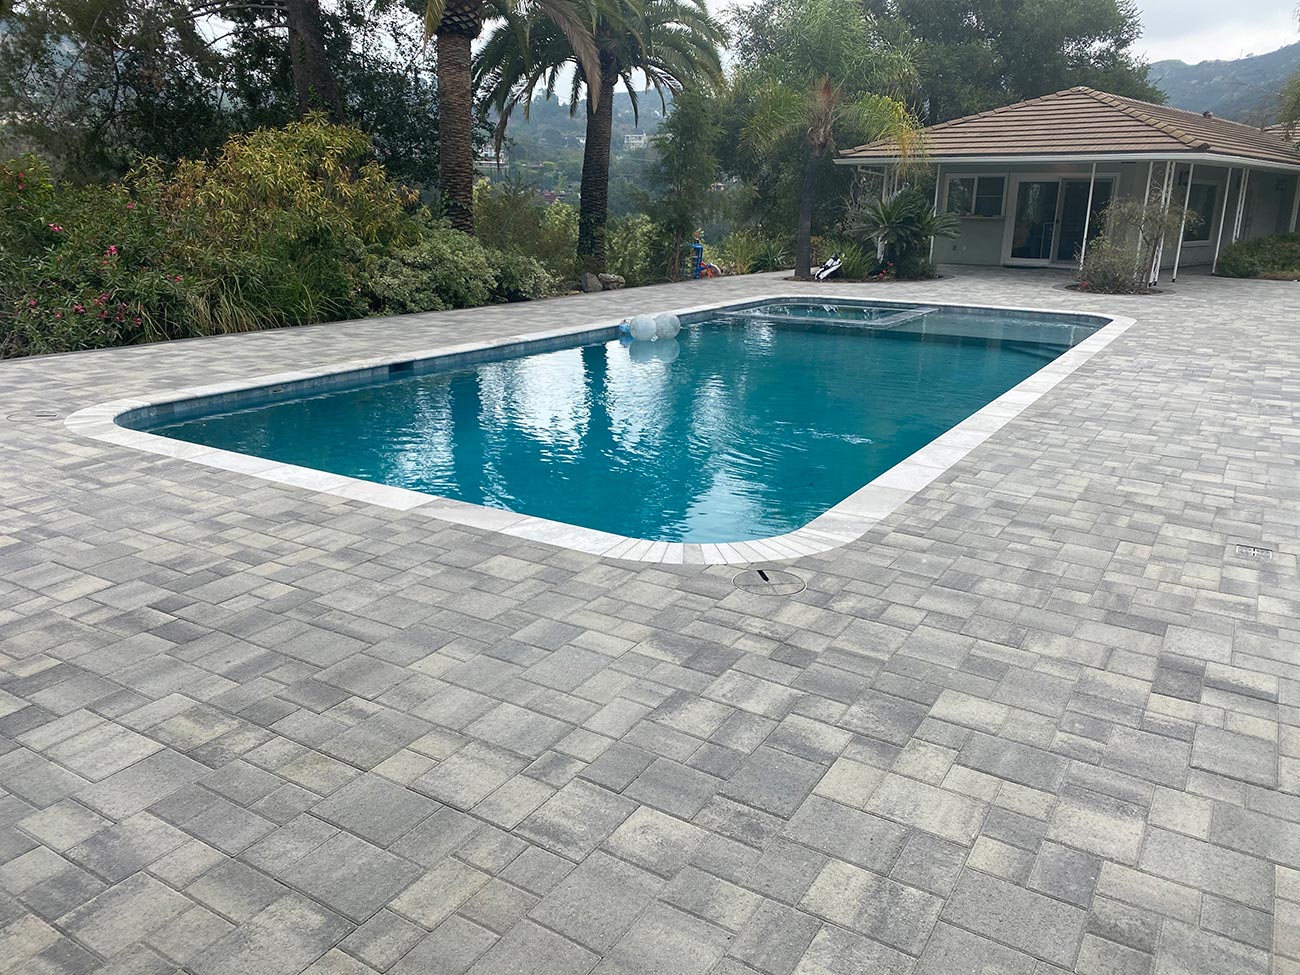 Angelus Courtyard paver pool deck in Gray Charocal color